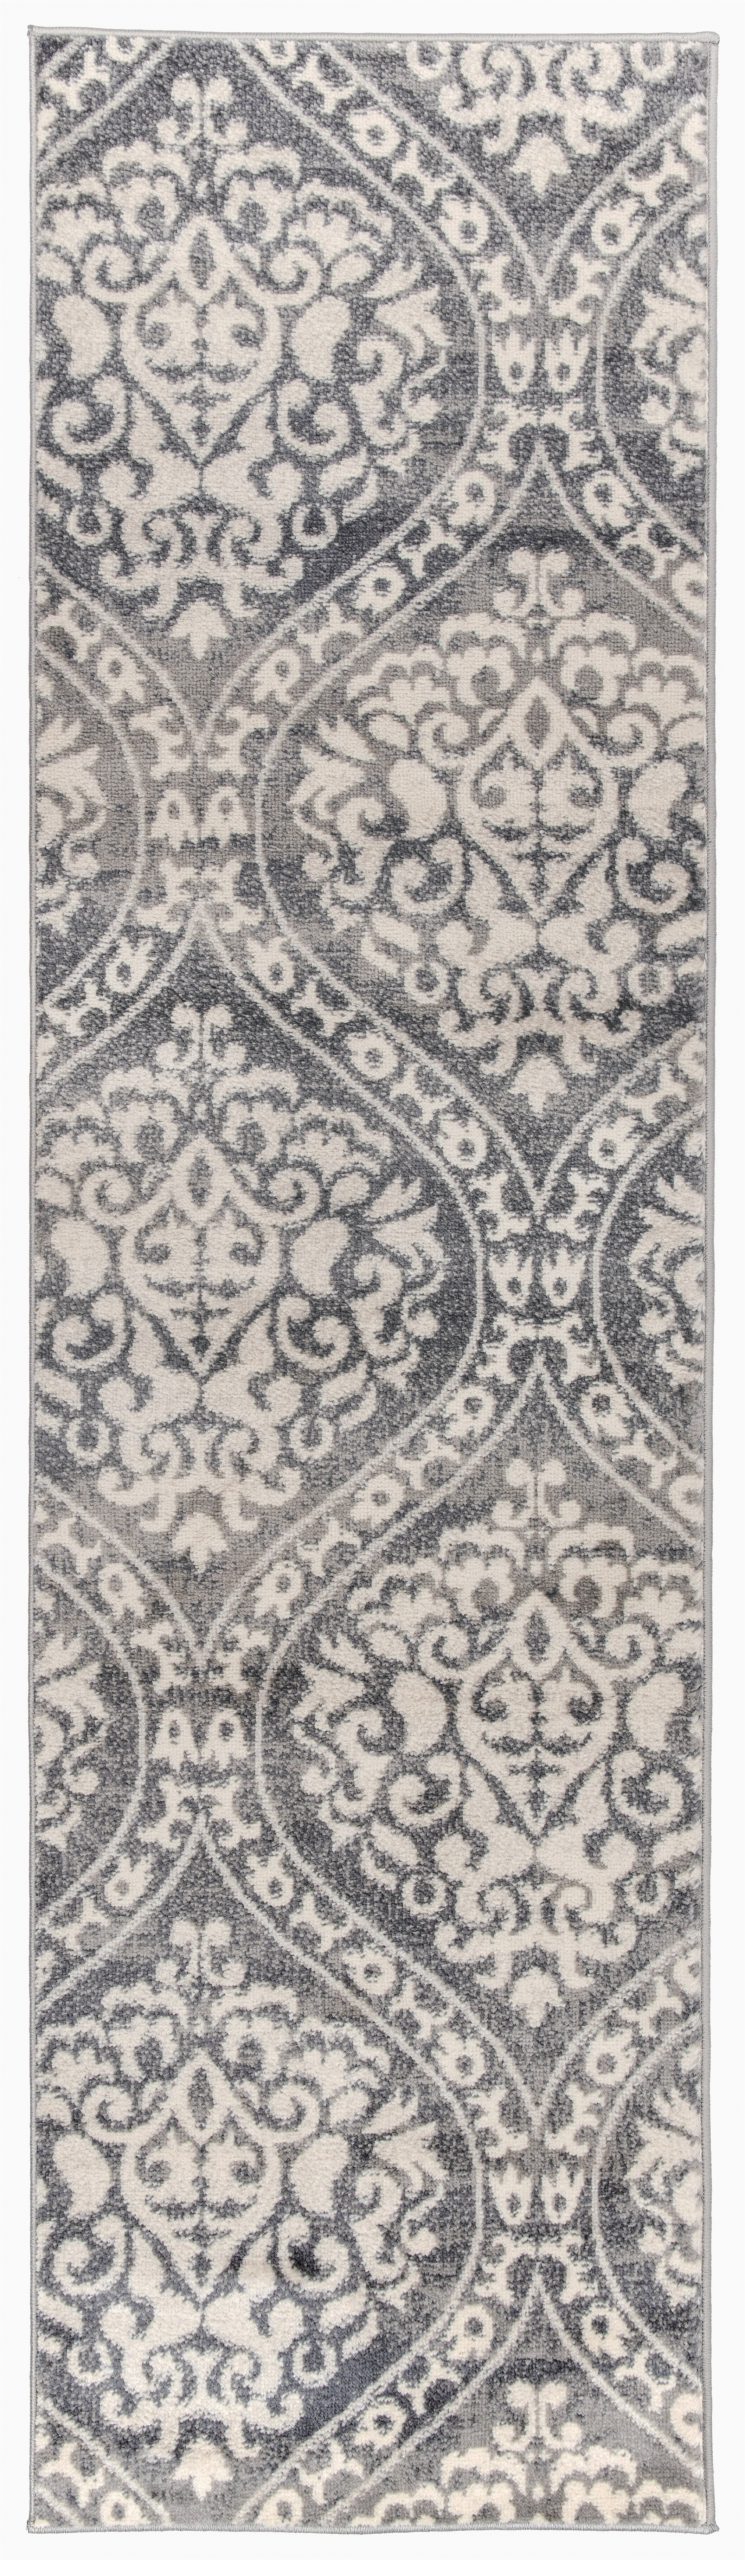 Better Homes Gardens Gray Abstract area Rug Demonte Abstract Gray Silver area Rug